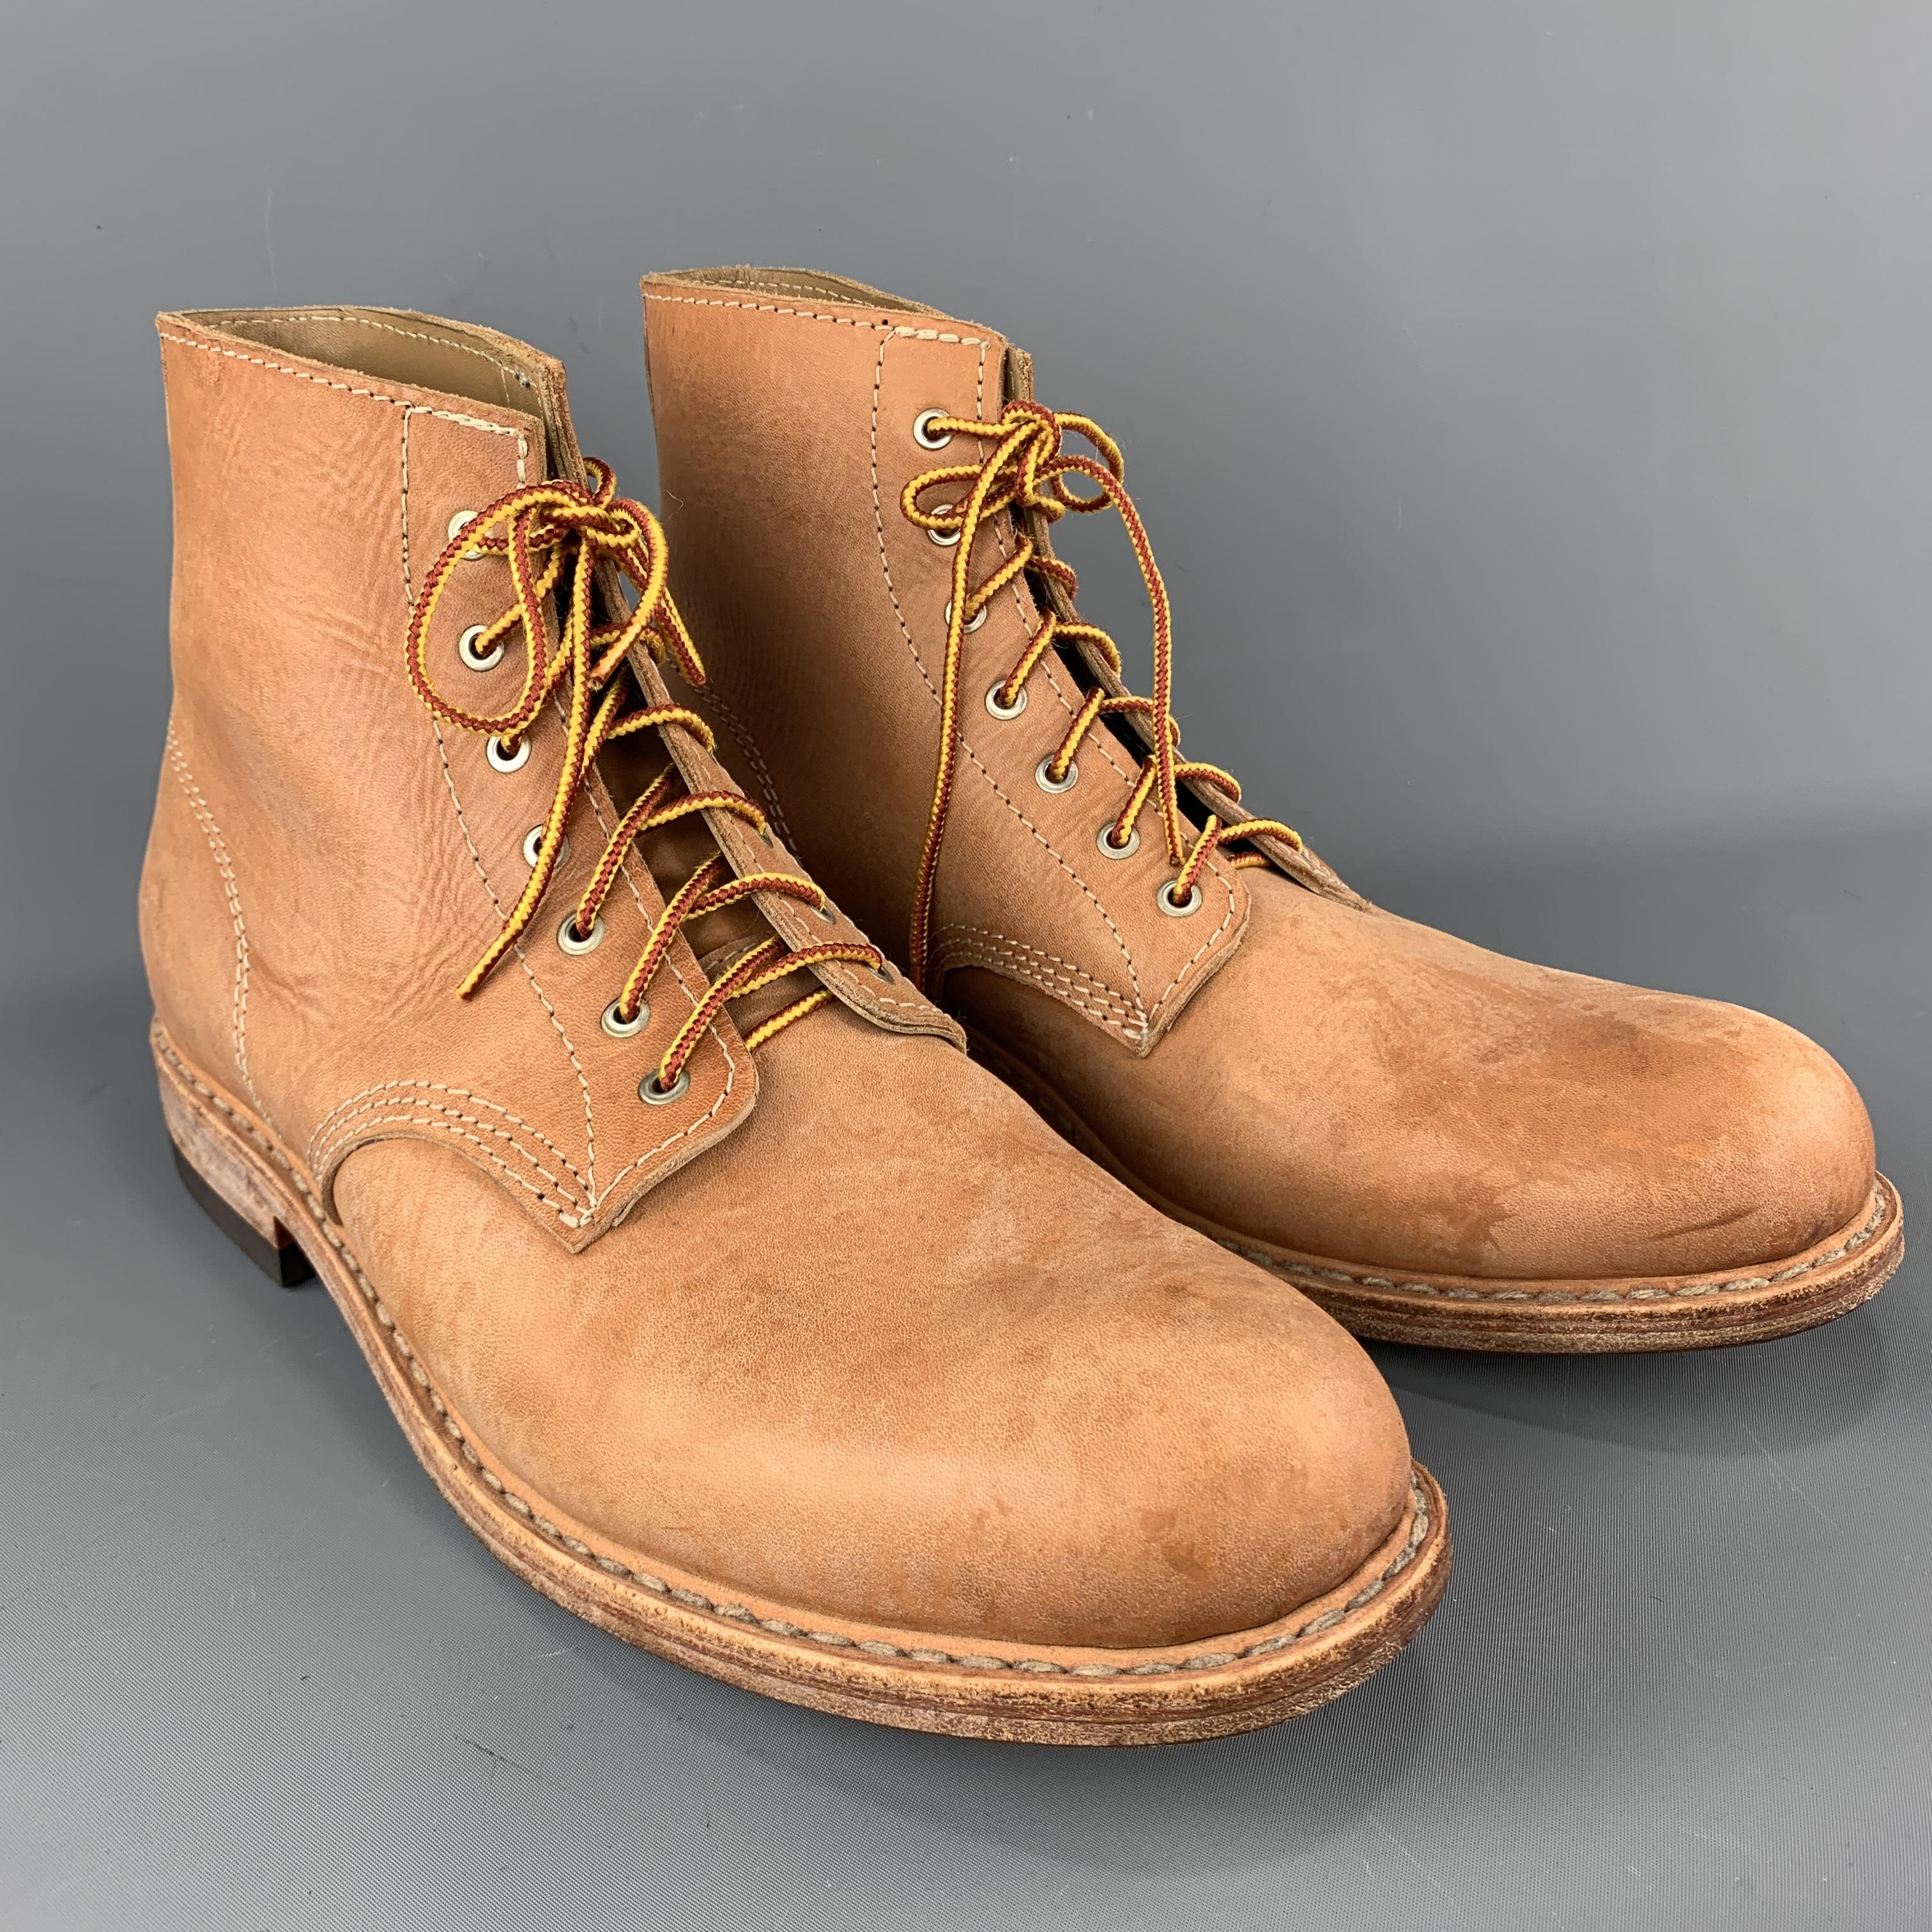 Handmade AL'S ATTIRE of San Francisco California work boots come in tan leather with a lace up front and tonal sole with rubber end heel. Made in USA.

Excellent Pre-Owned Condition.
Marked: 12

Outsole: 13 x 4.75 in.